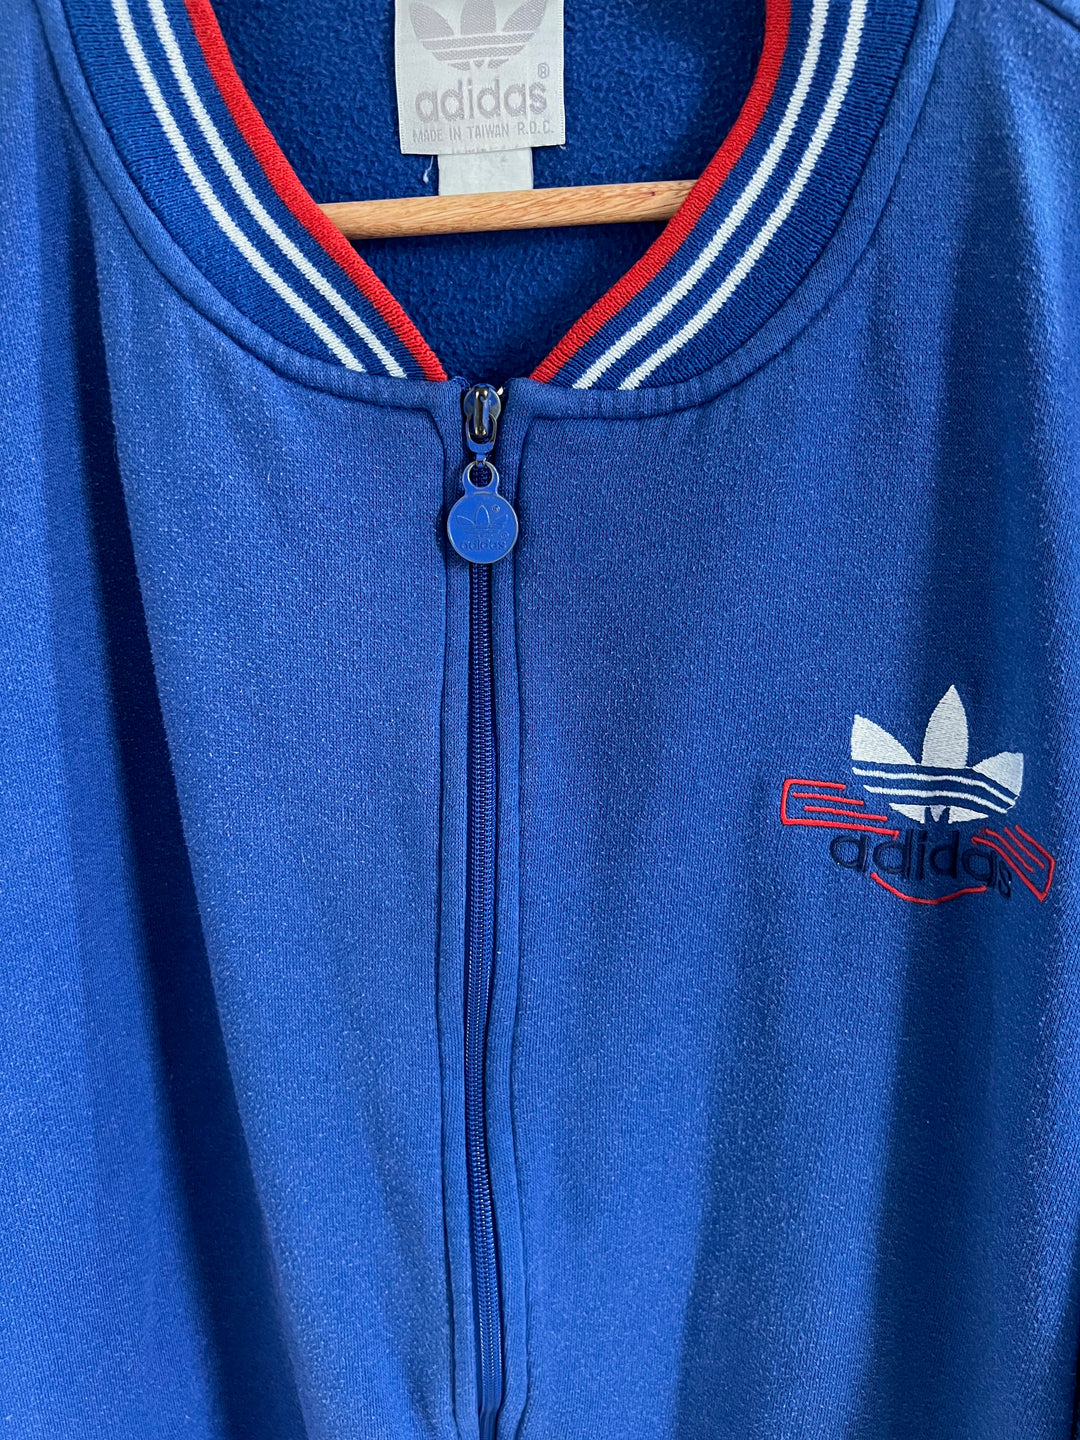 Vintage Adidas Blue track Jacket.  Blue with red and white trim.